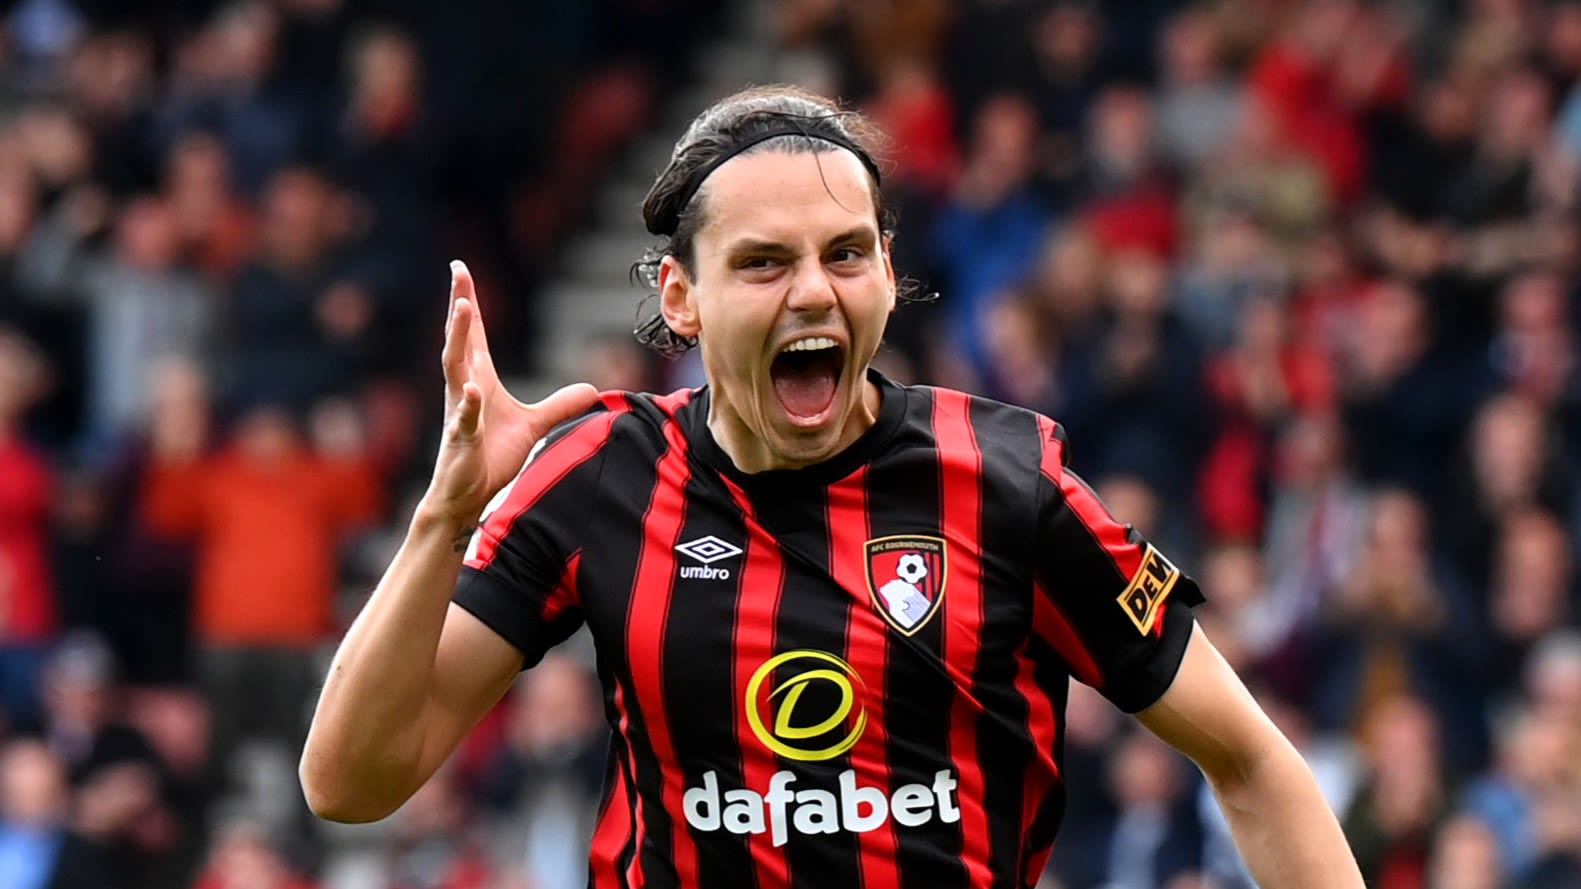 Bournemouth complete permanent signing of Unal